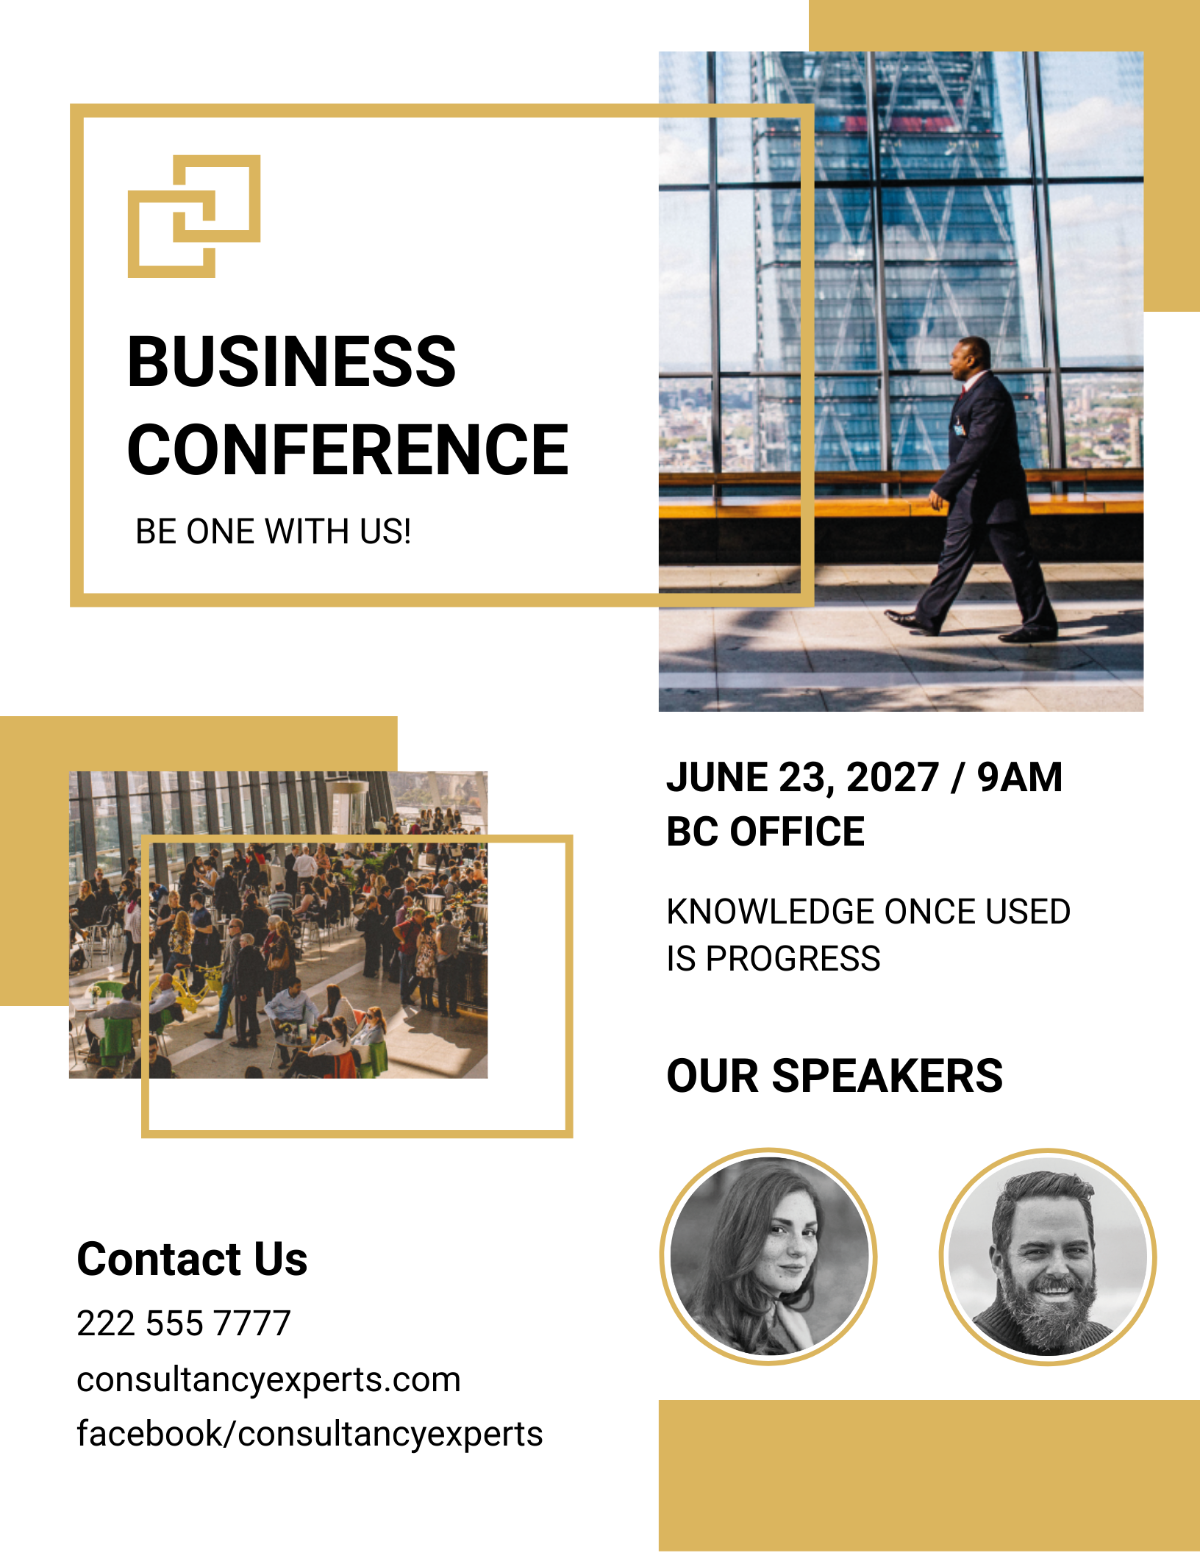 Business Event Conference Flyer